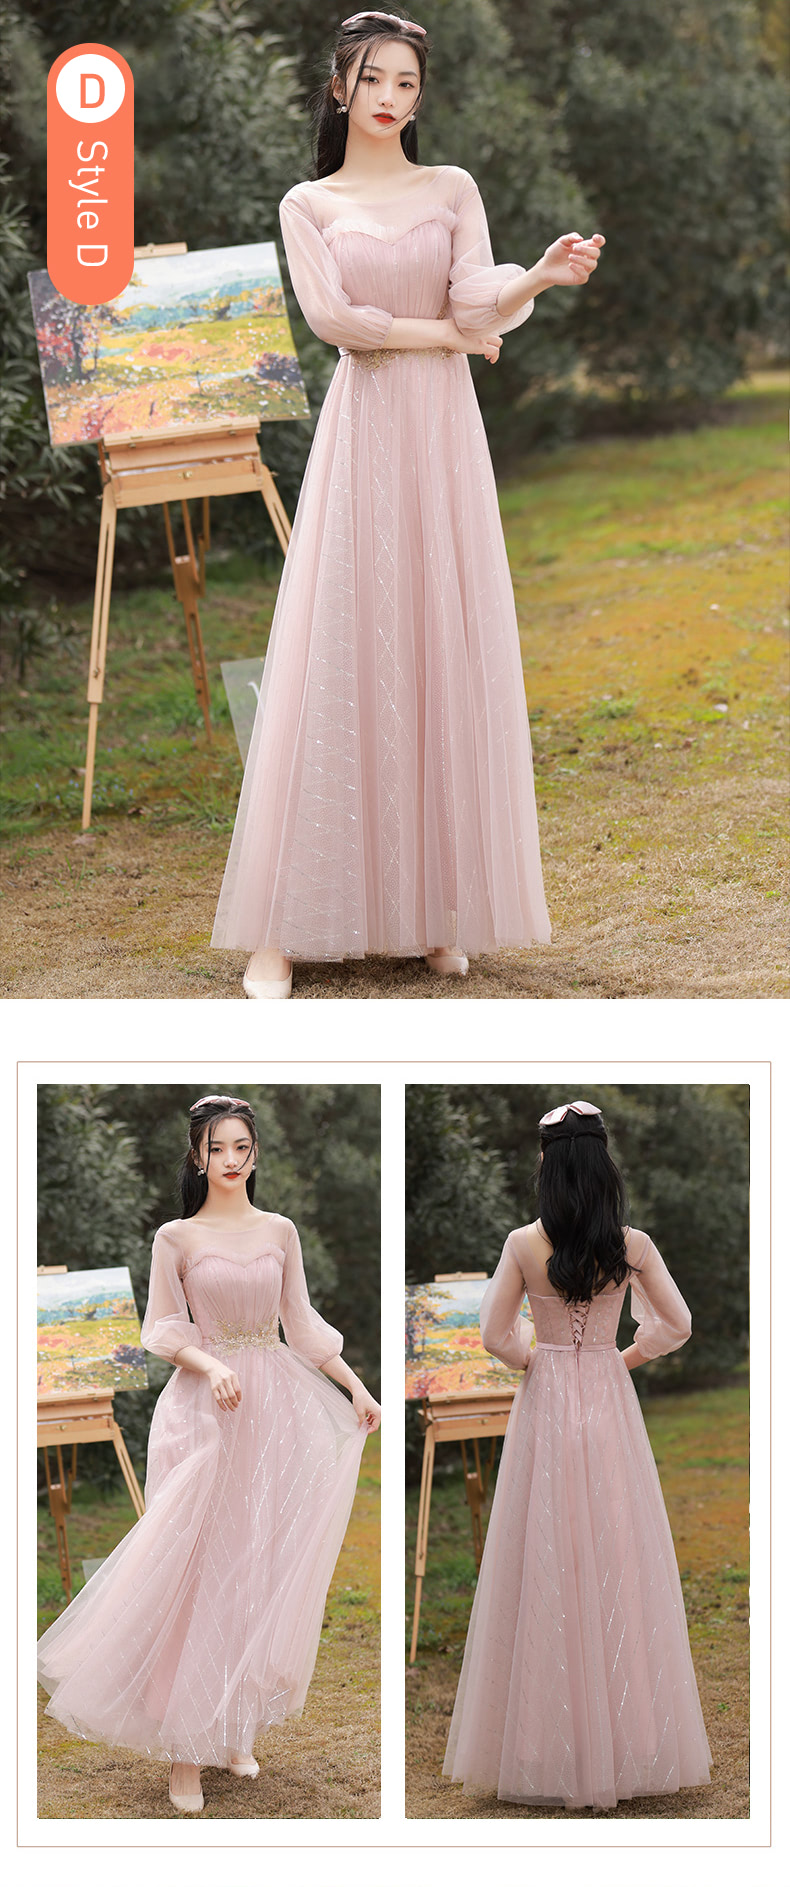 Fairy-Pink-Bridesmaid-Dress-with-Sleeves-Chiffon-Long-Casual-Gown24.jpg